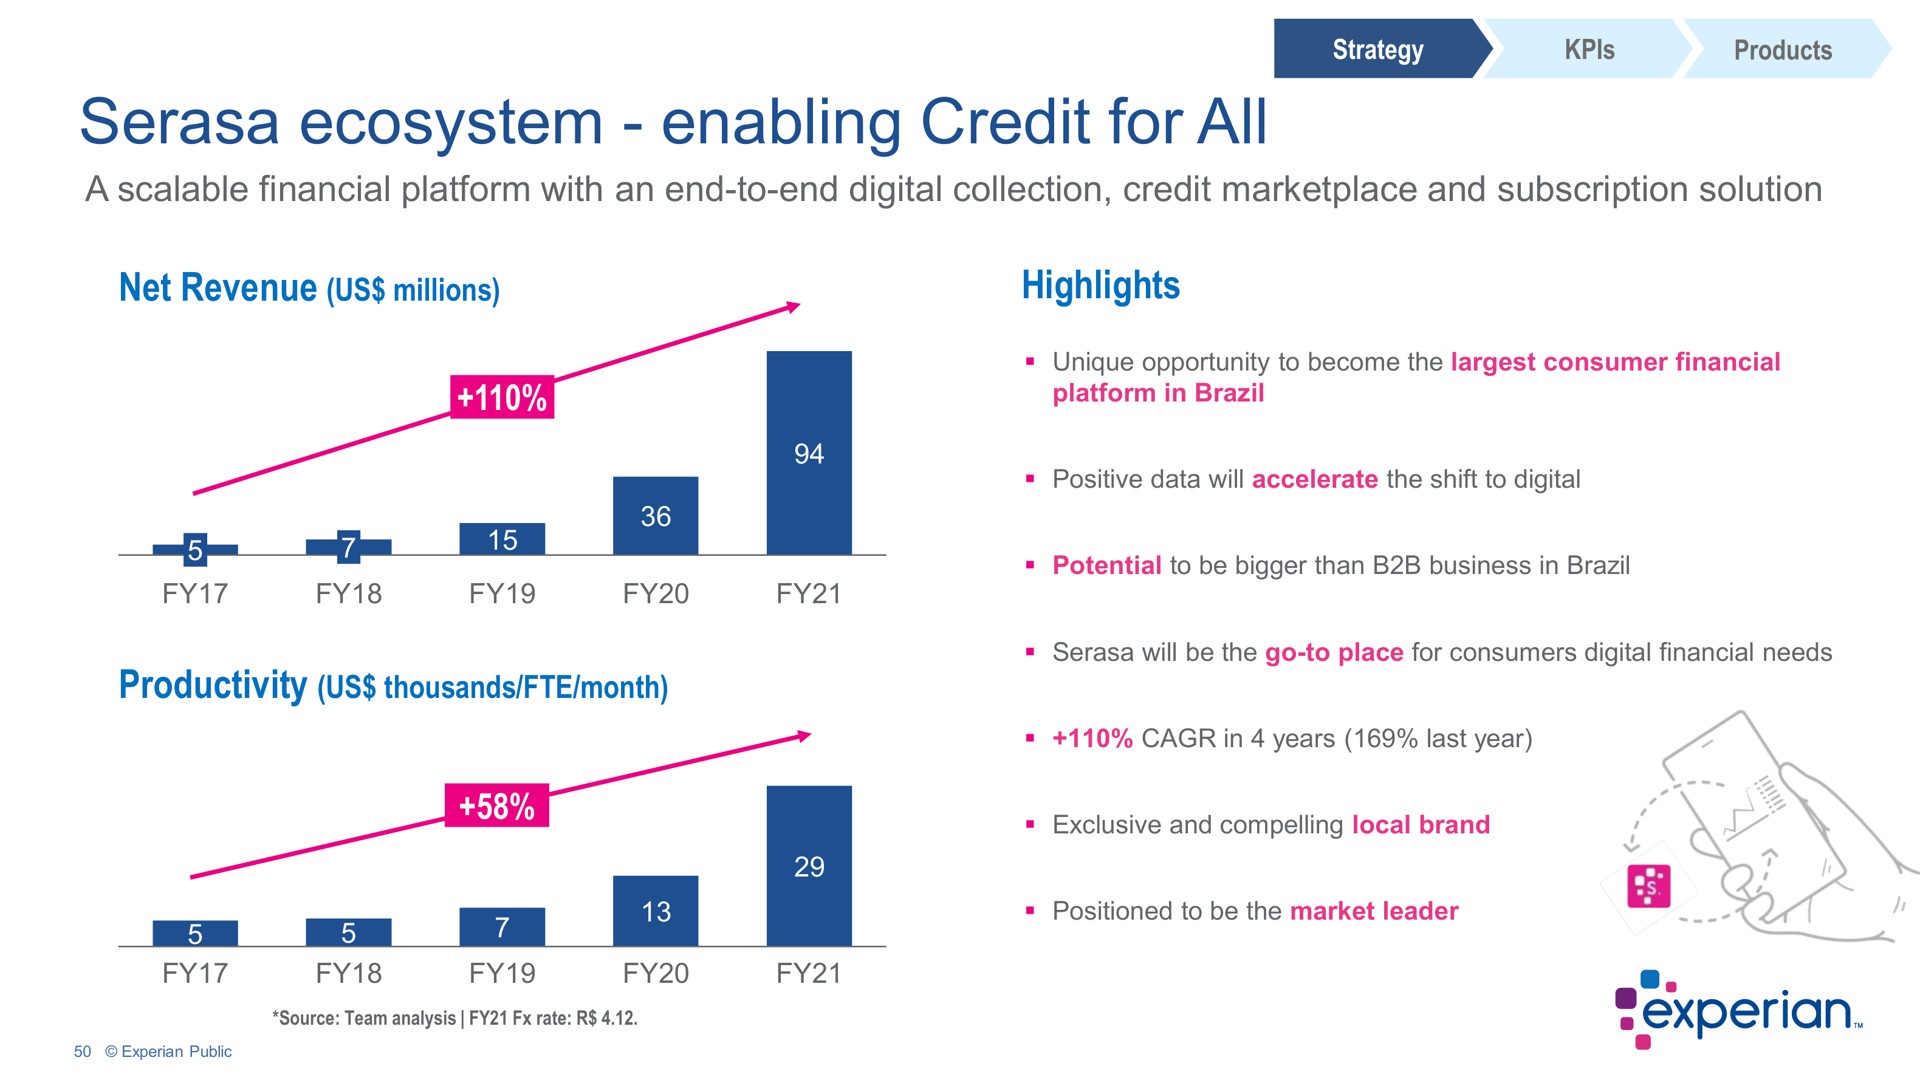 ecosystem enabling credit for all | Experian